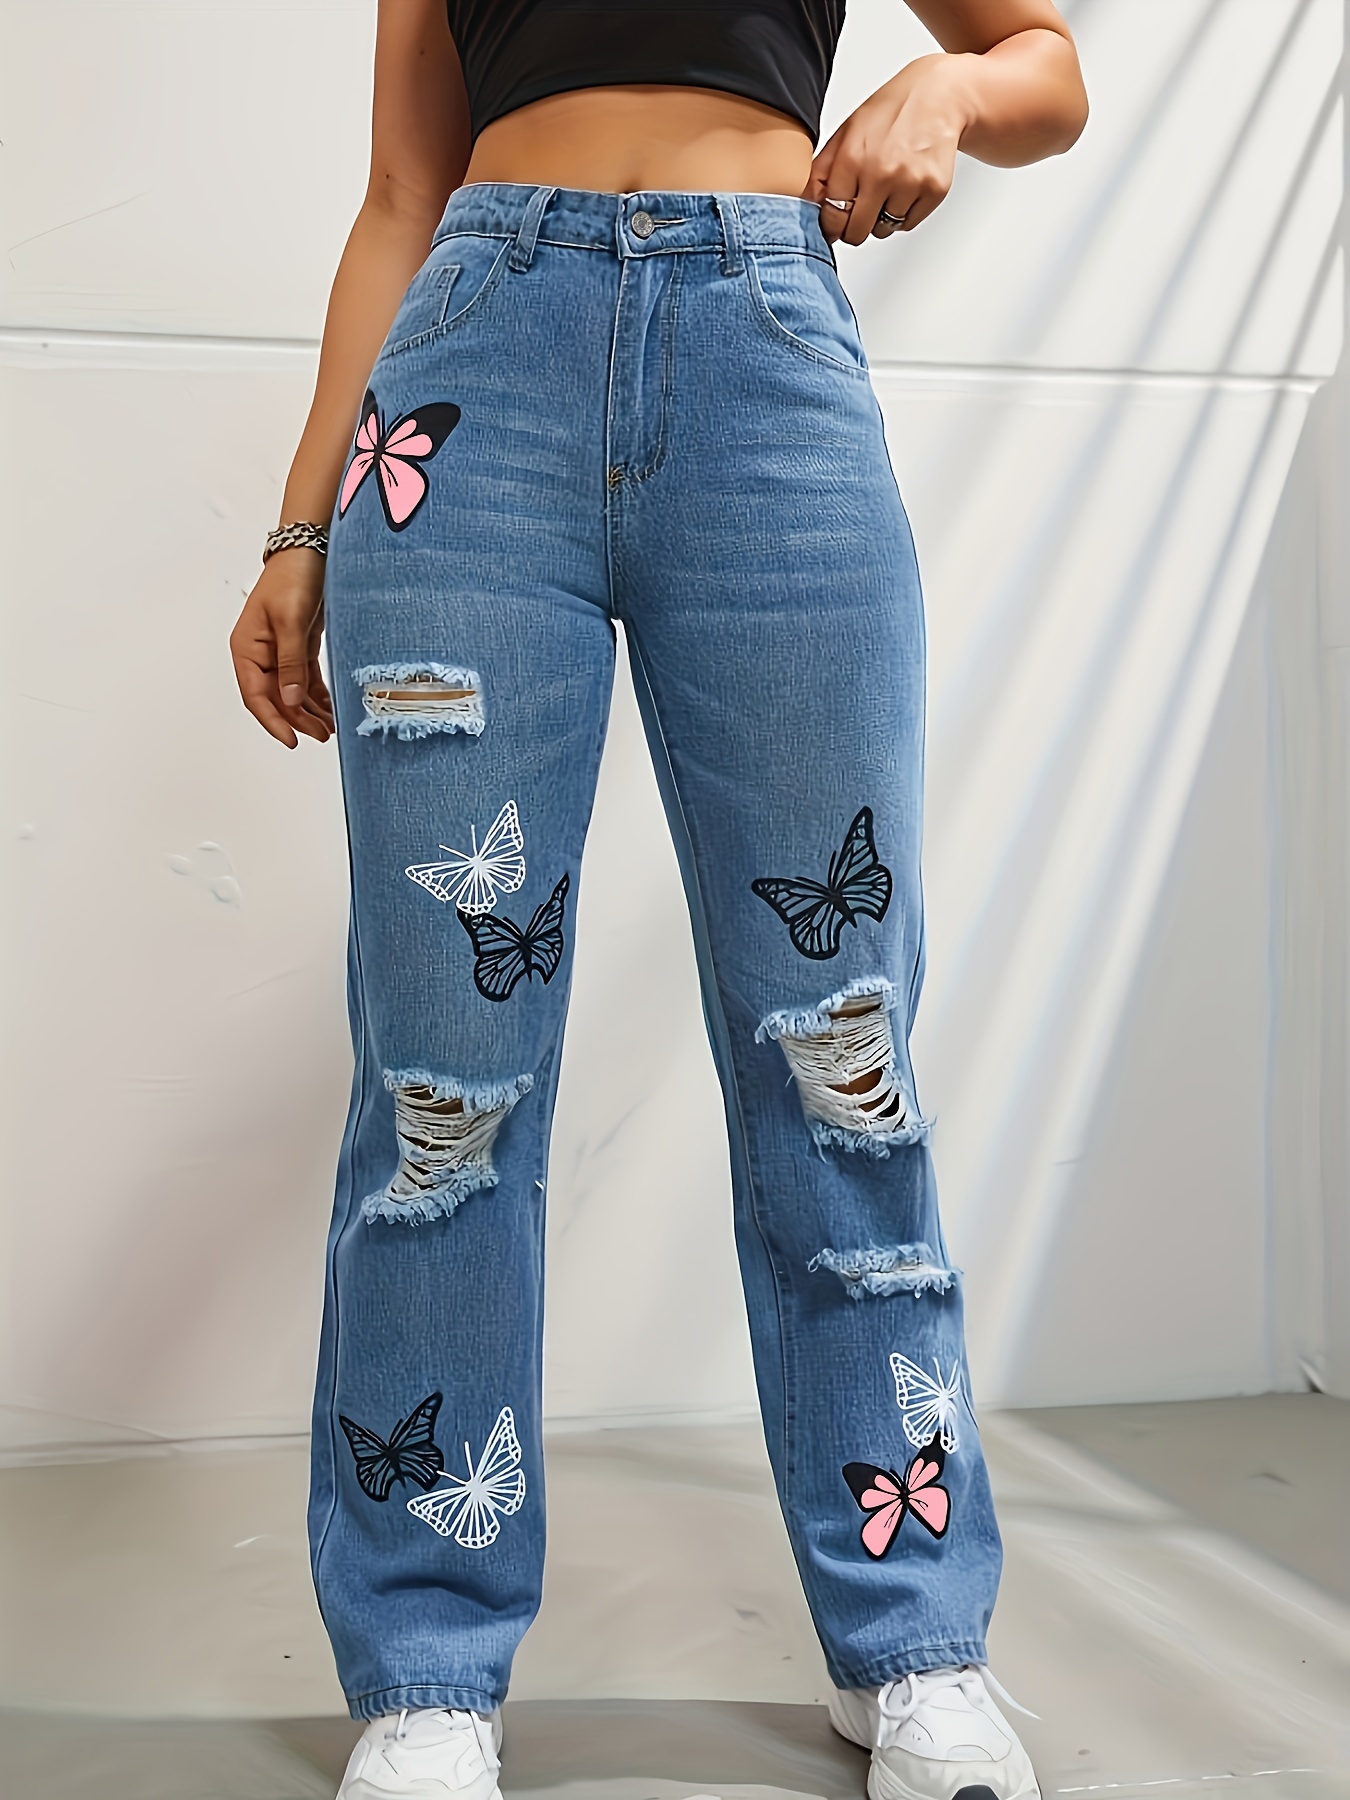 Plus Size Pants for Women High Waisted Baggy Ripped Jeans Fashion Large  Denim Pocket Elastic Jeans Casual Pants 